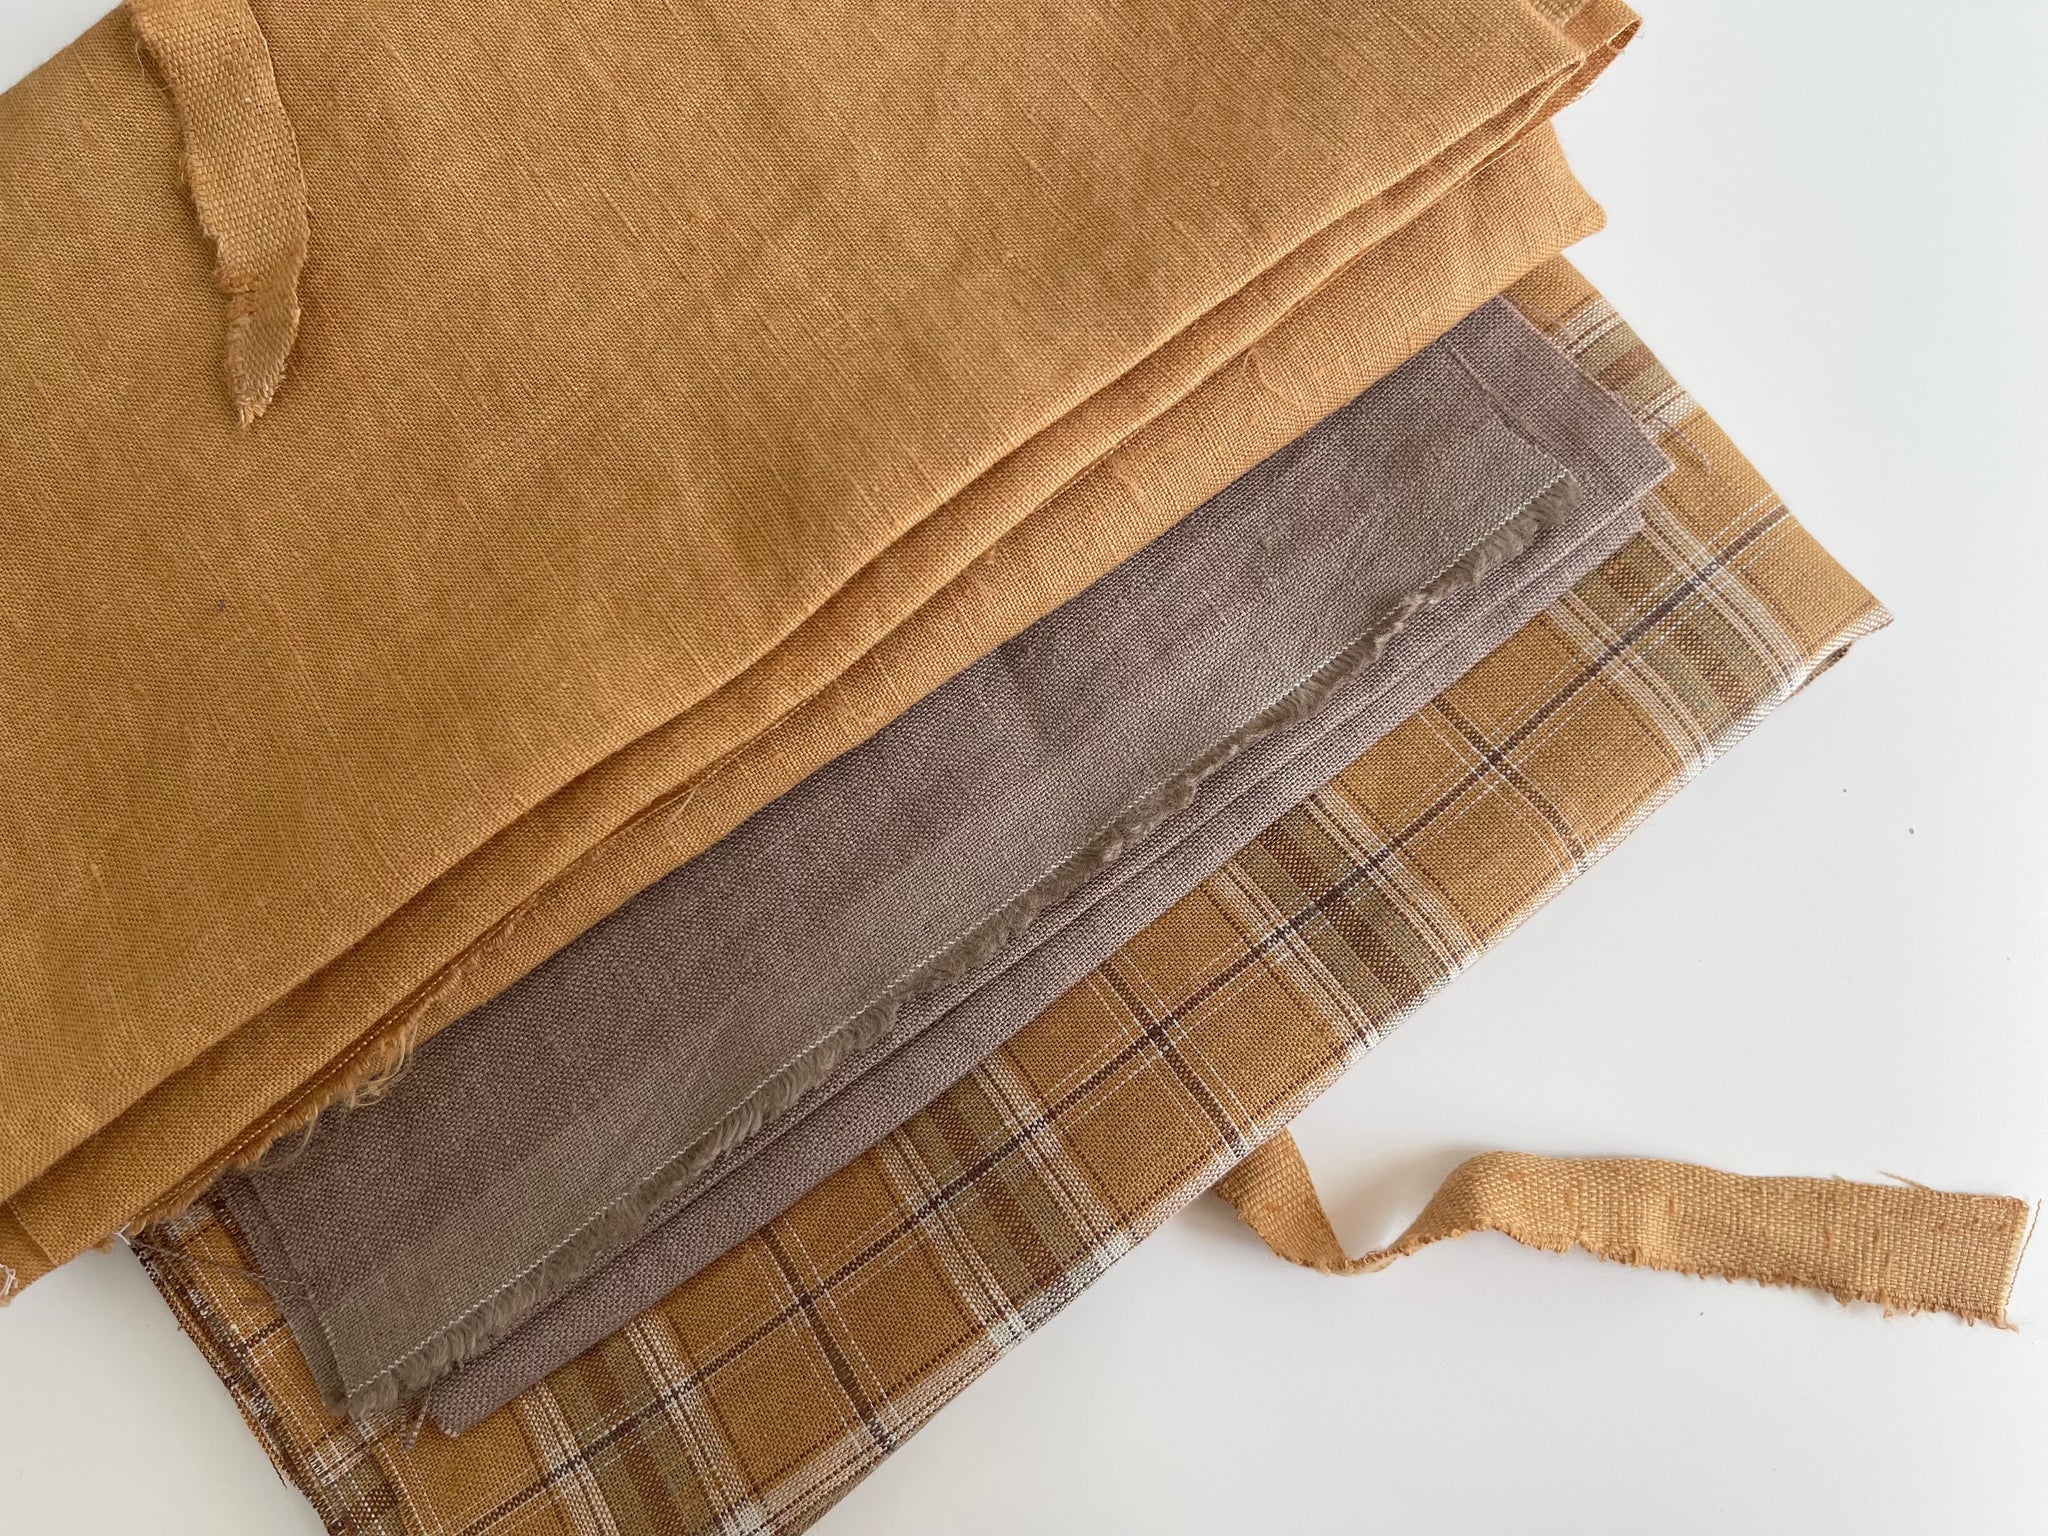 Linen Fabric Remnants - Mustard, Desert Clay and Mustard Plaid